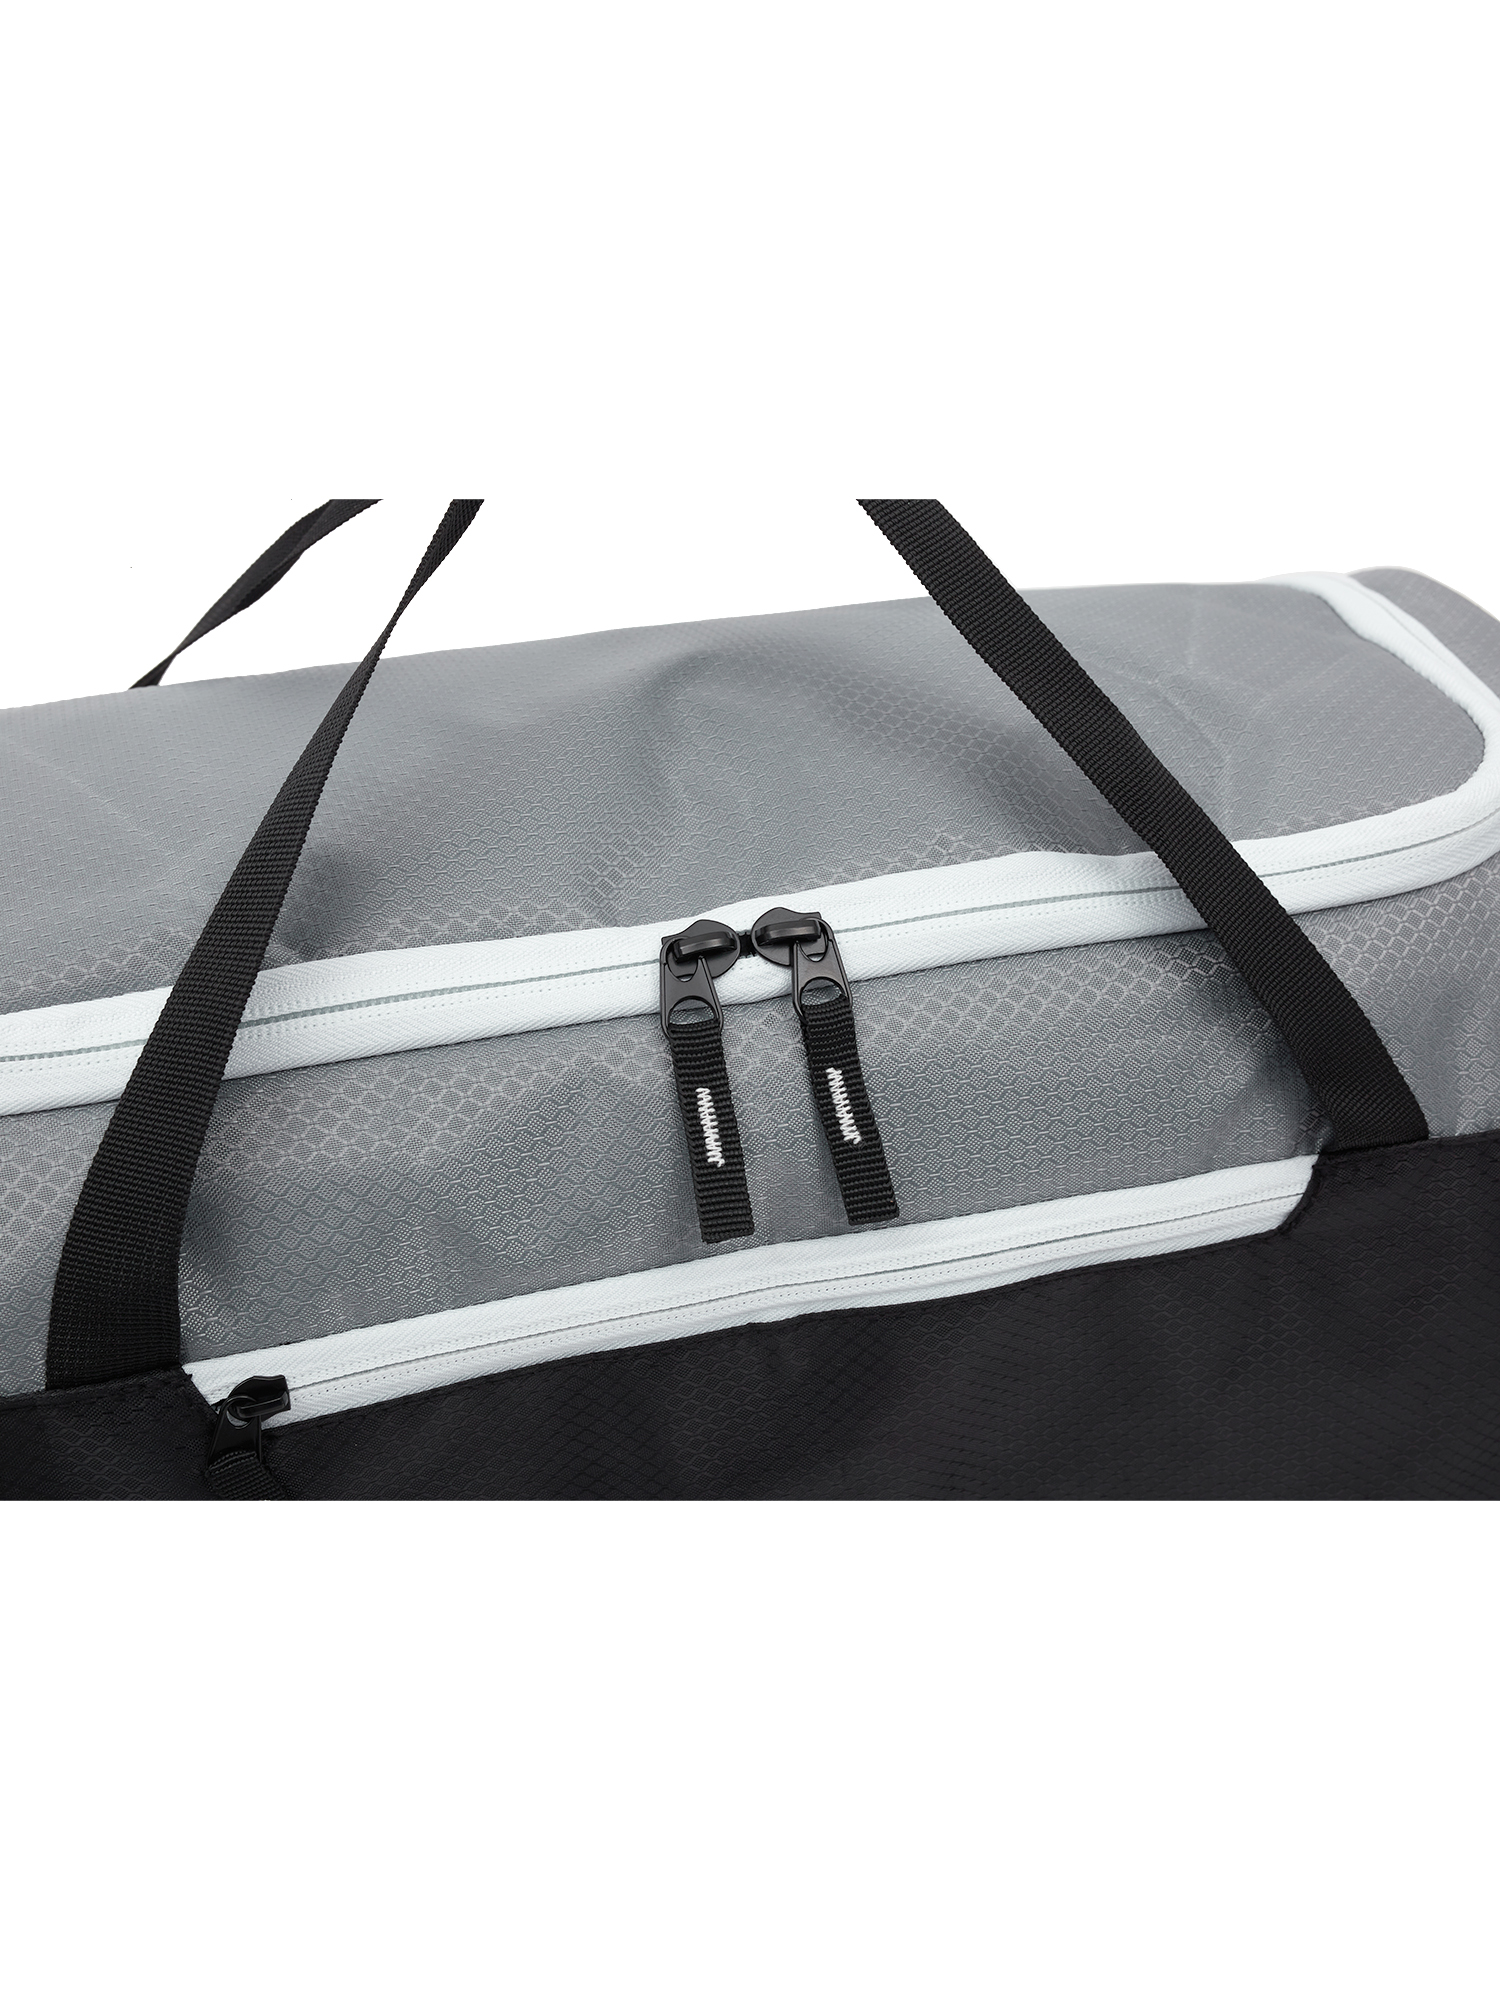 Protege 18" Polyester Sport Duffel - Black - image 5 of 10